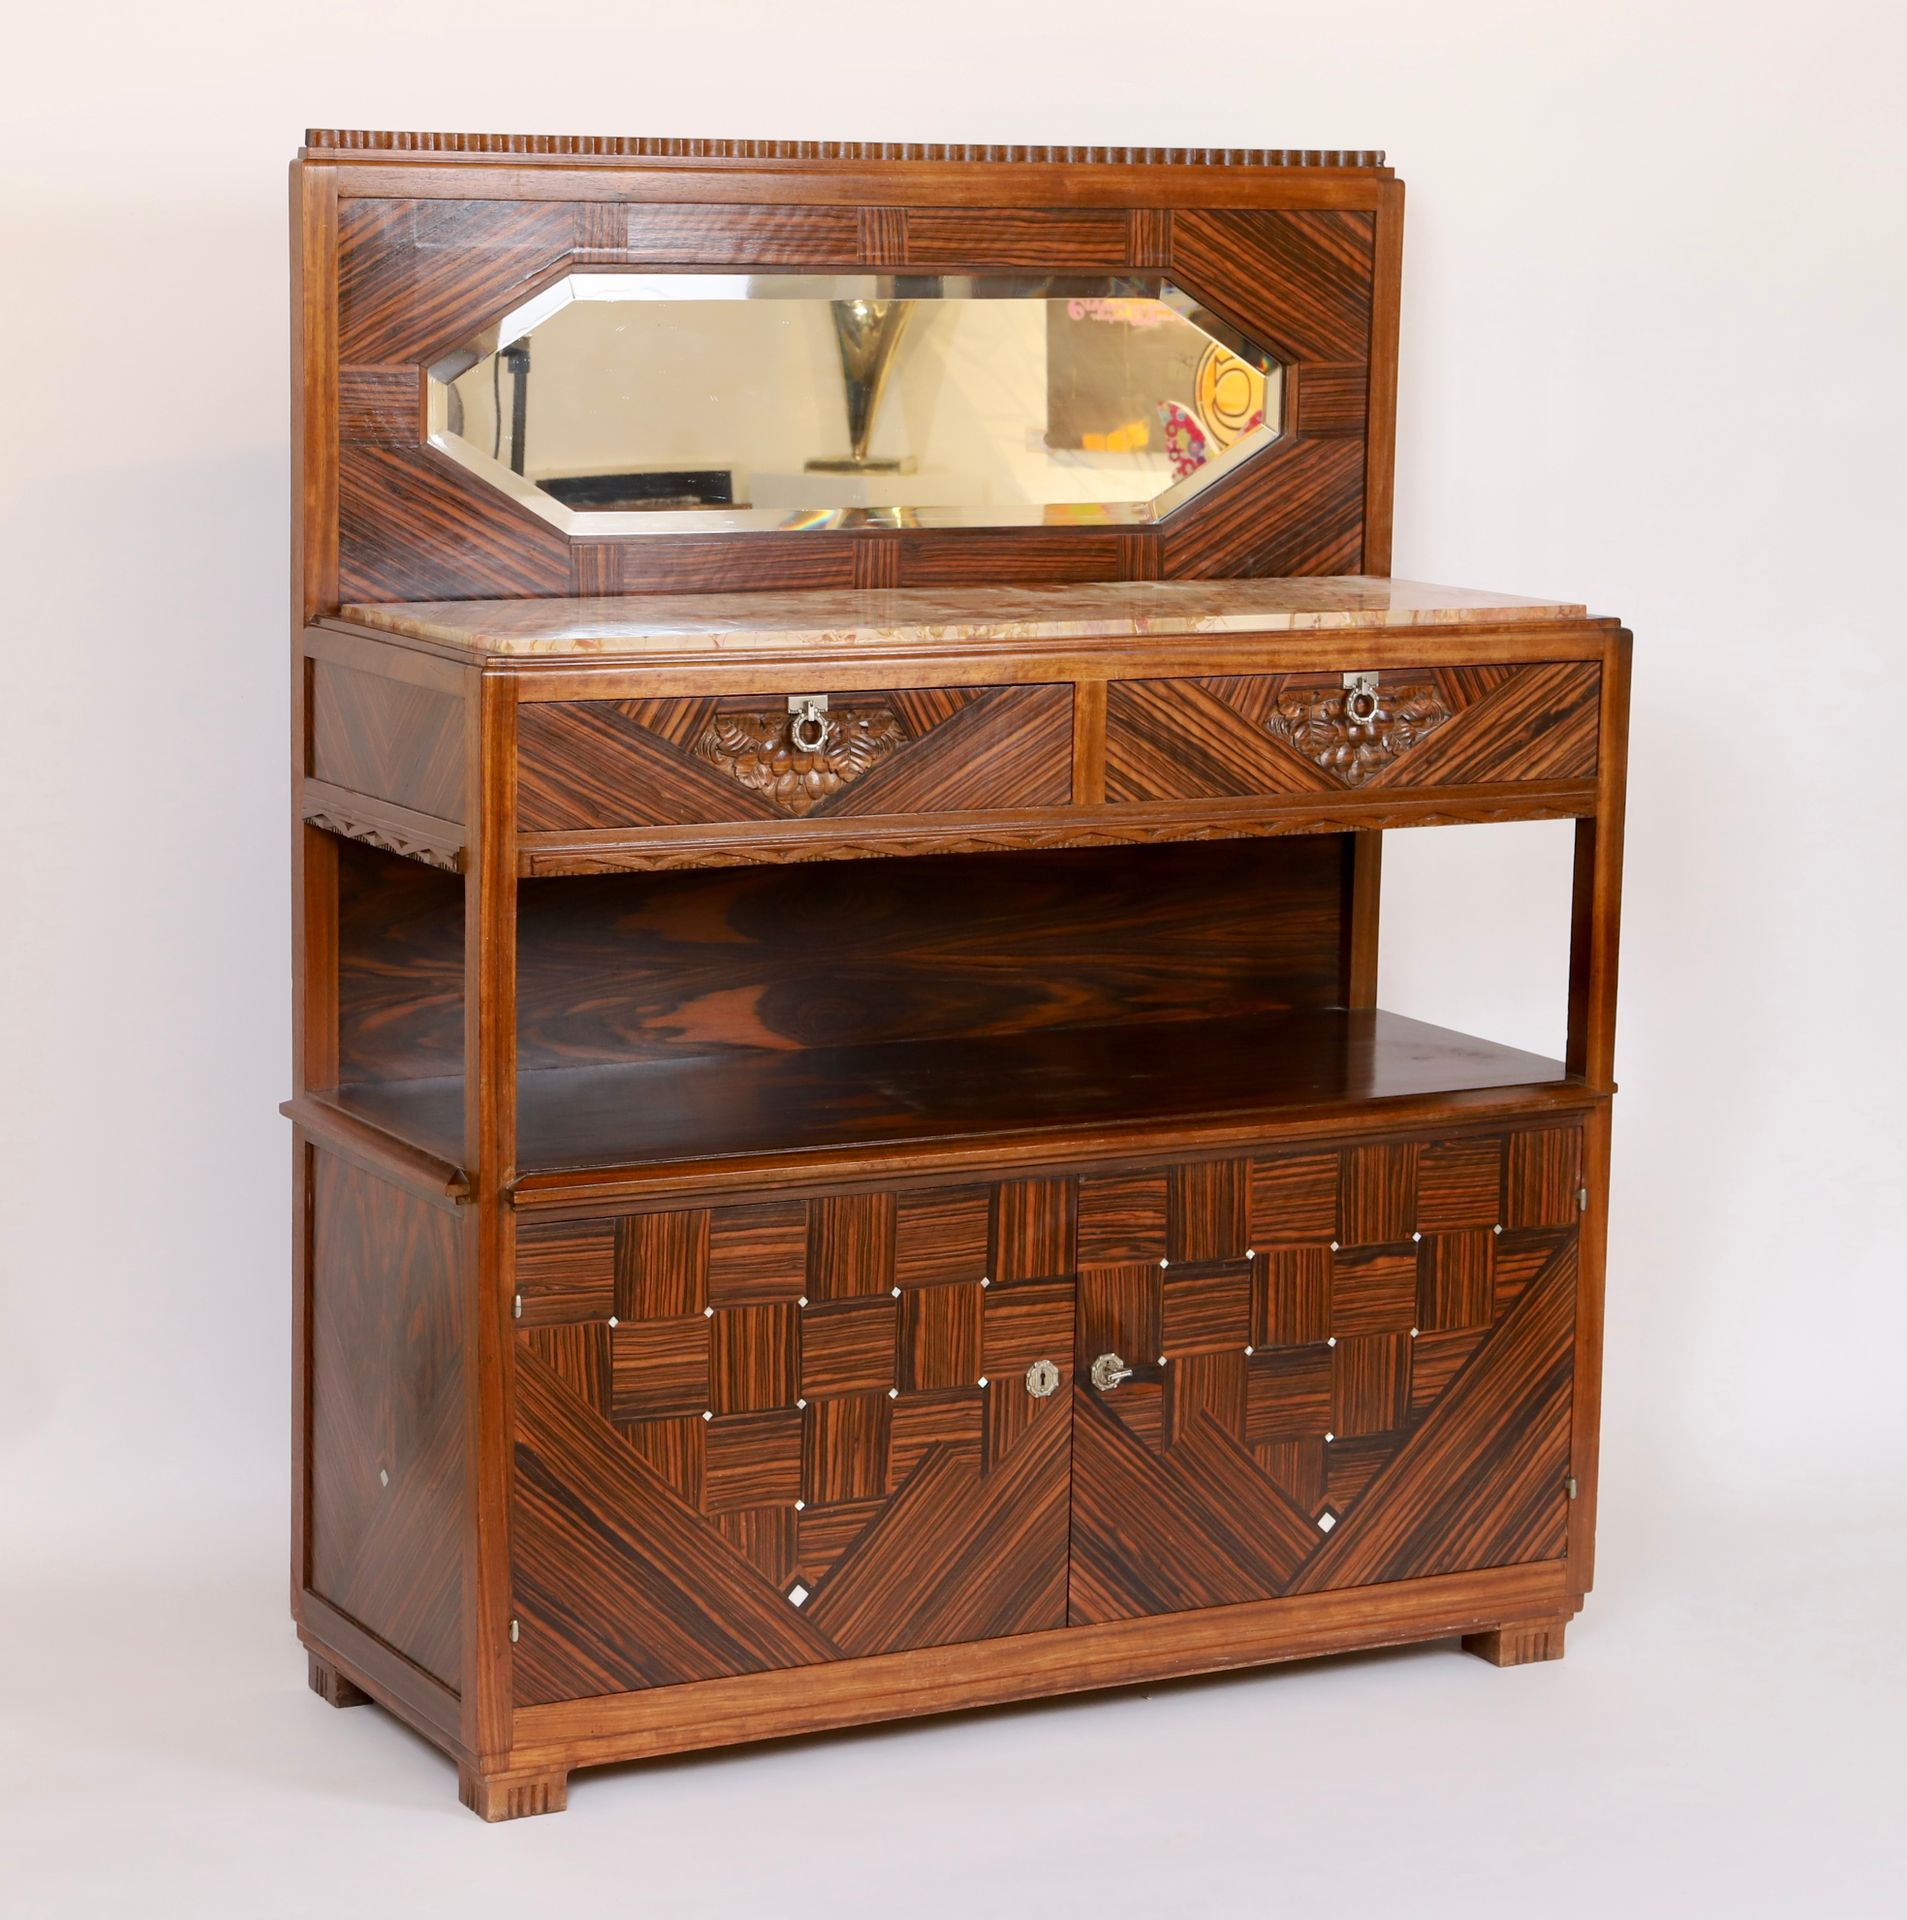 Null Jules CAYETTE (1882-1953)
Exceptional Art-Deco tall unit in rosewood and ro&hellip;